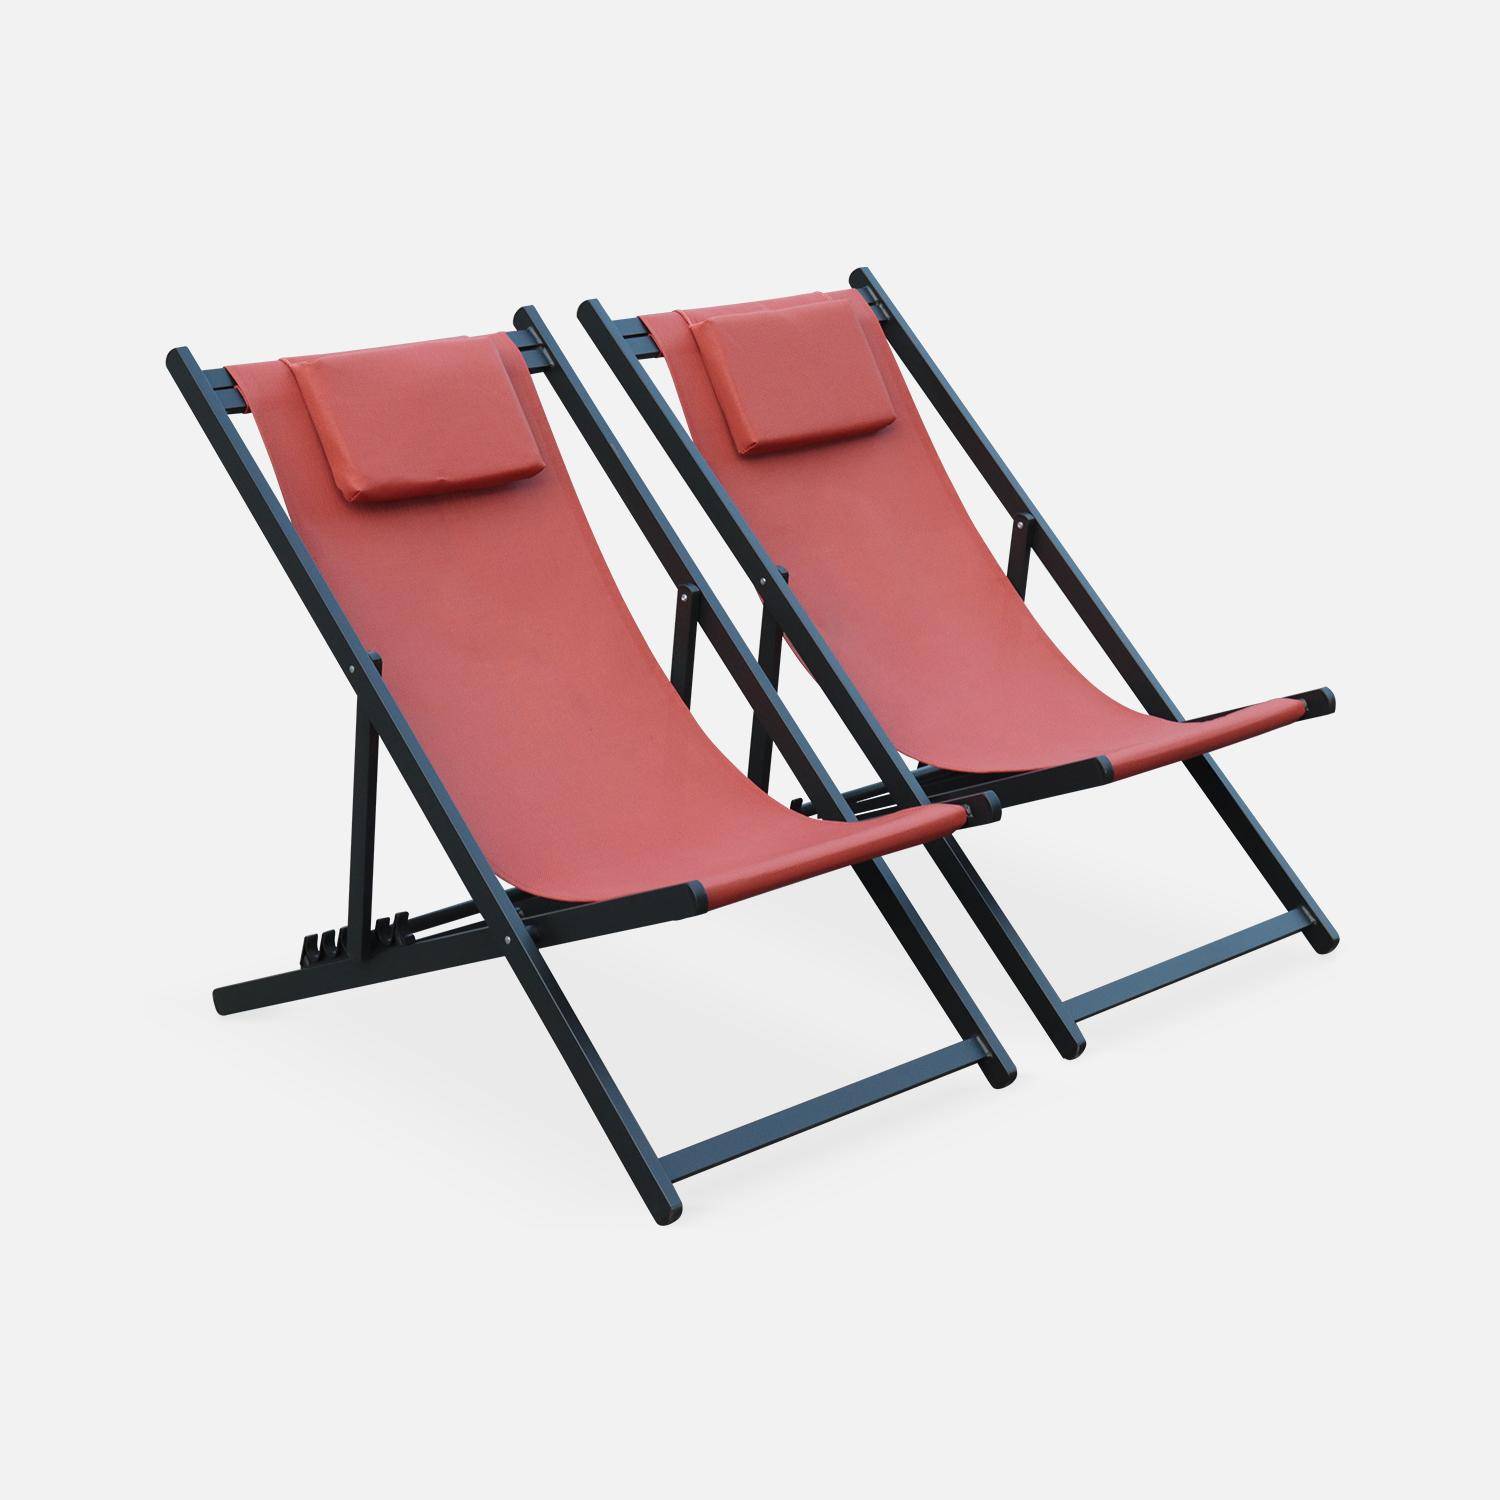 Set of 2 sun loungers - adjustable deck chairs with headrests made from aluminium frame - Gaia - Anthracite frame, Terracotta textilene,sweeek,Photo2